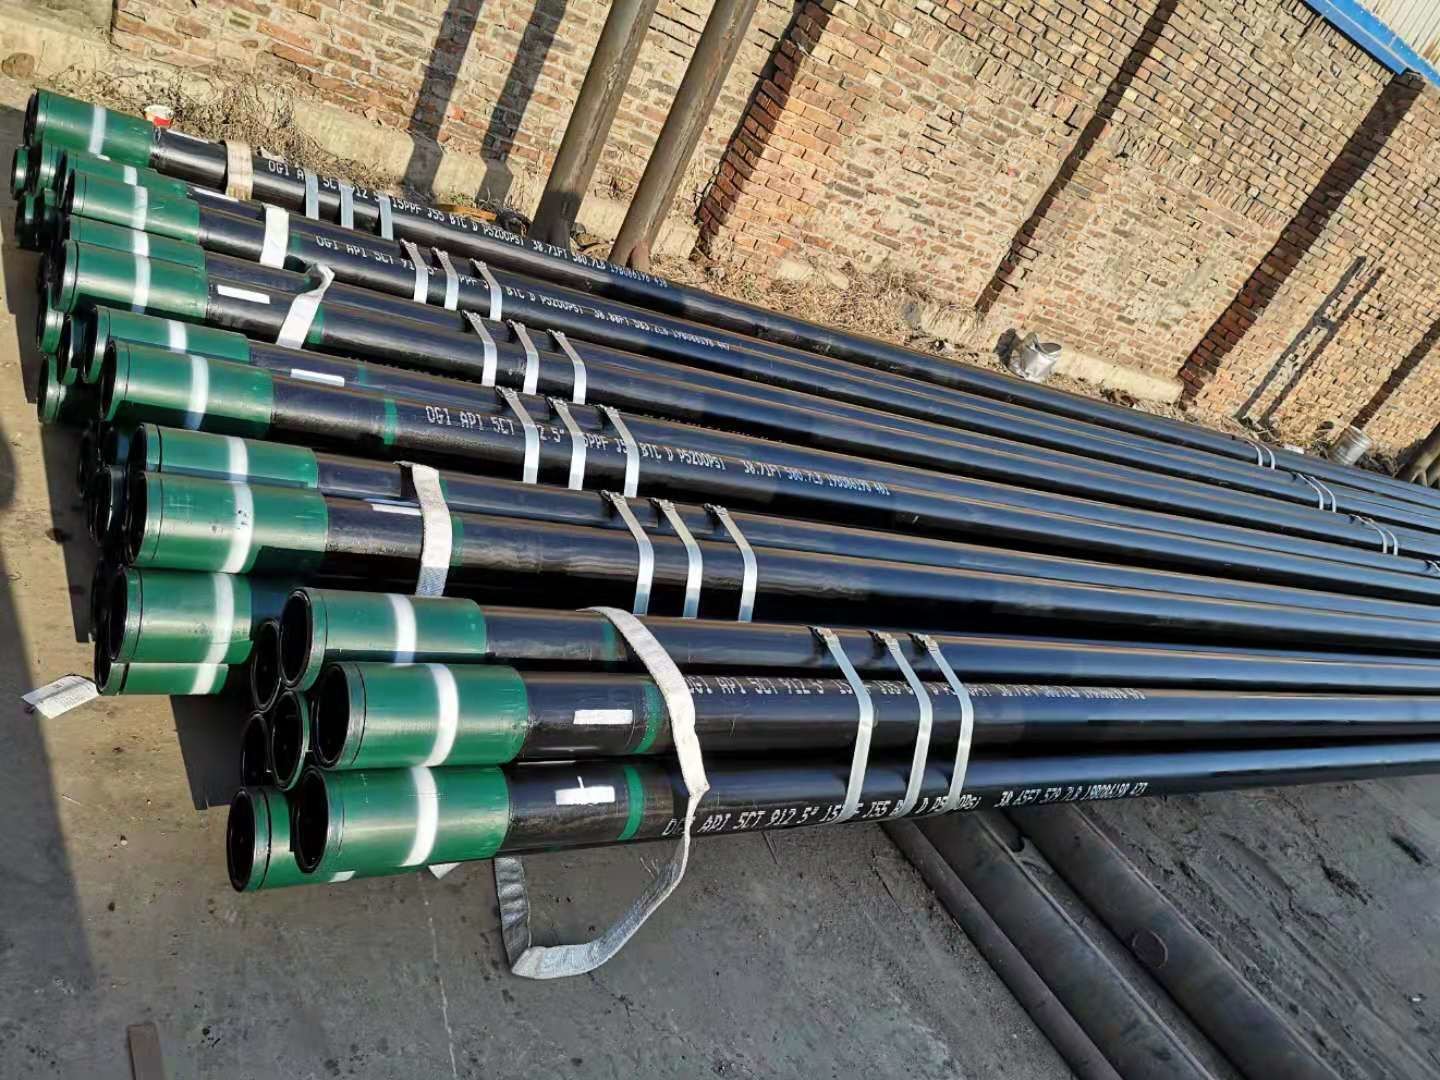 China China Supplier pipe casing and tubing API 5CT J55 K55 N80 L80 P110 seamless steel pipe/oil Drilling Tubing Pipe wholesale